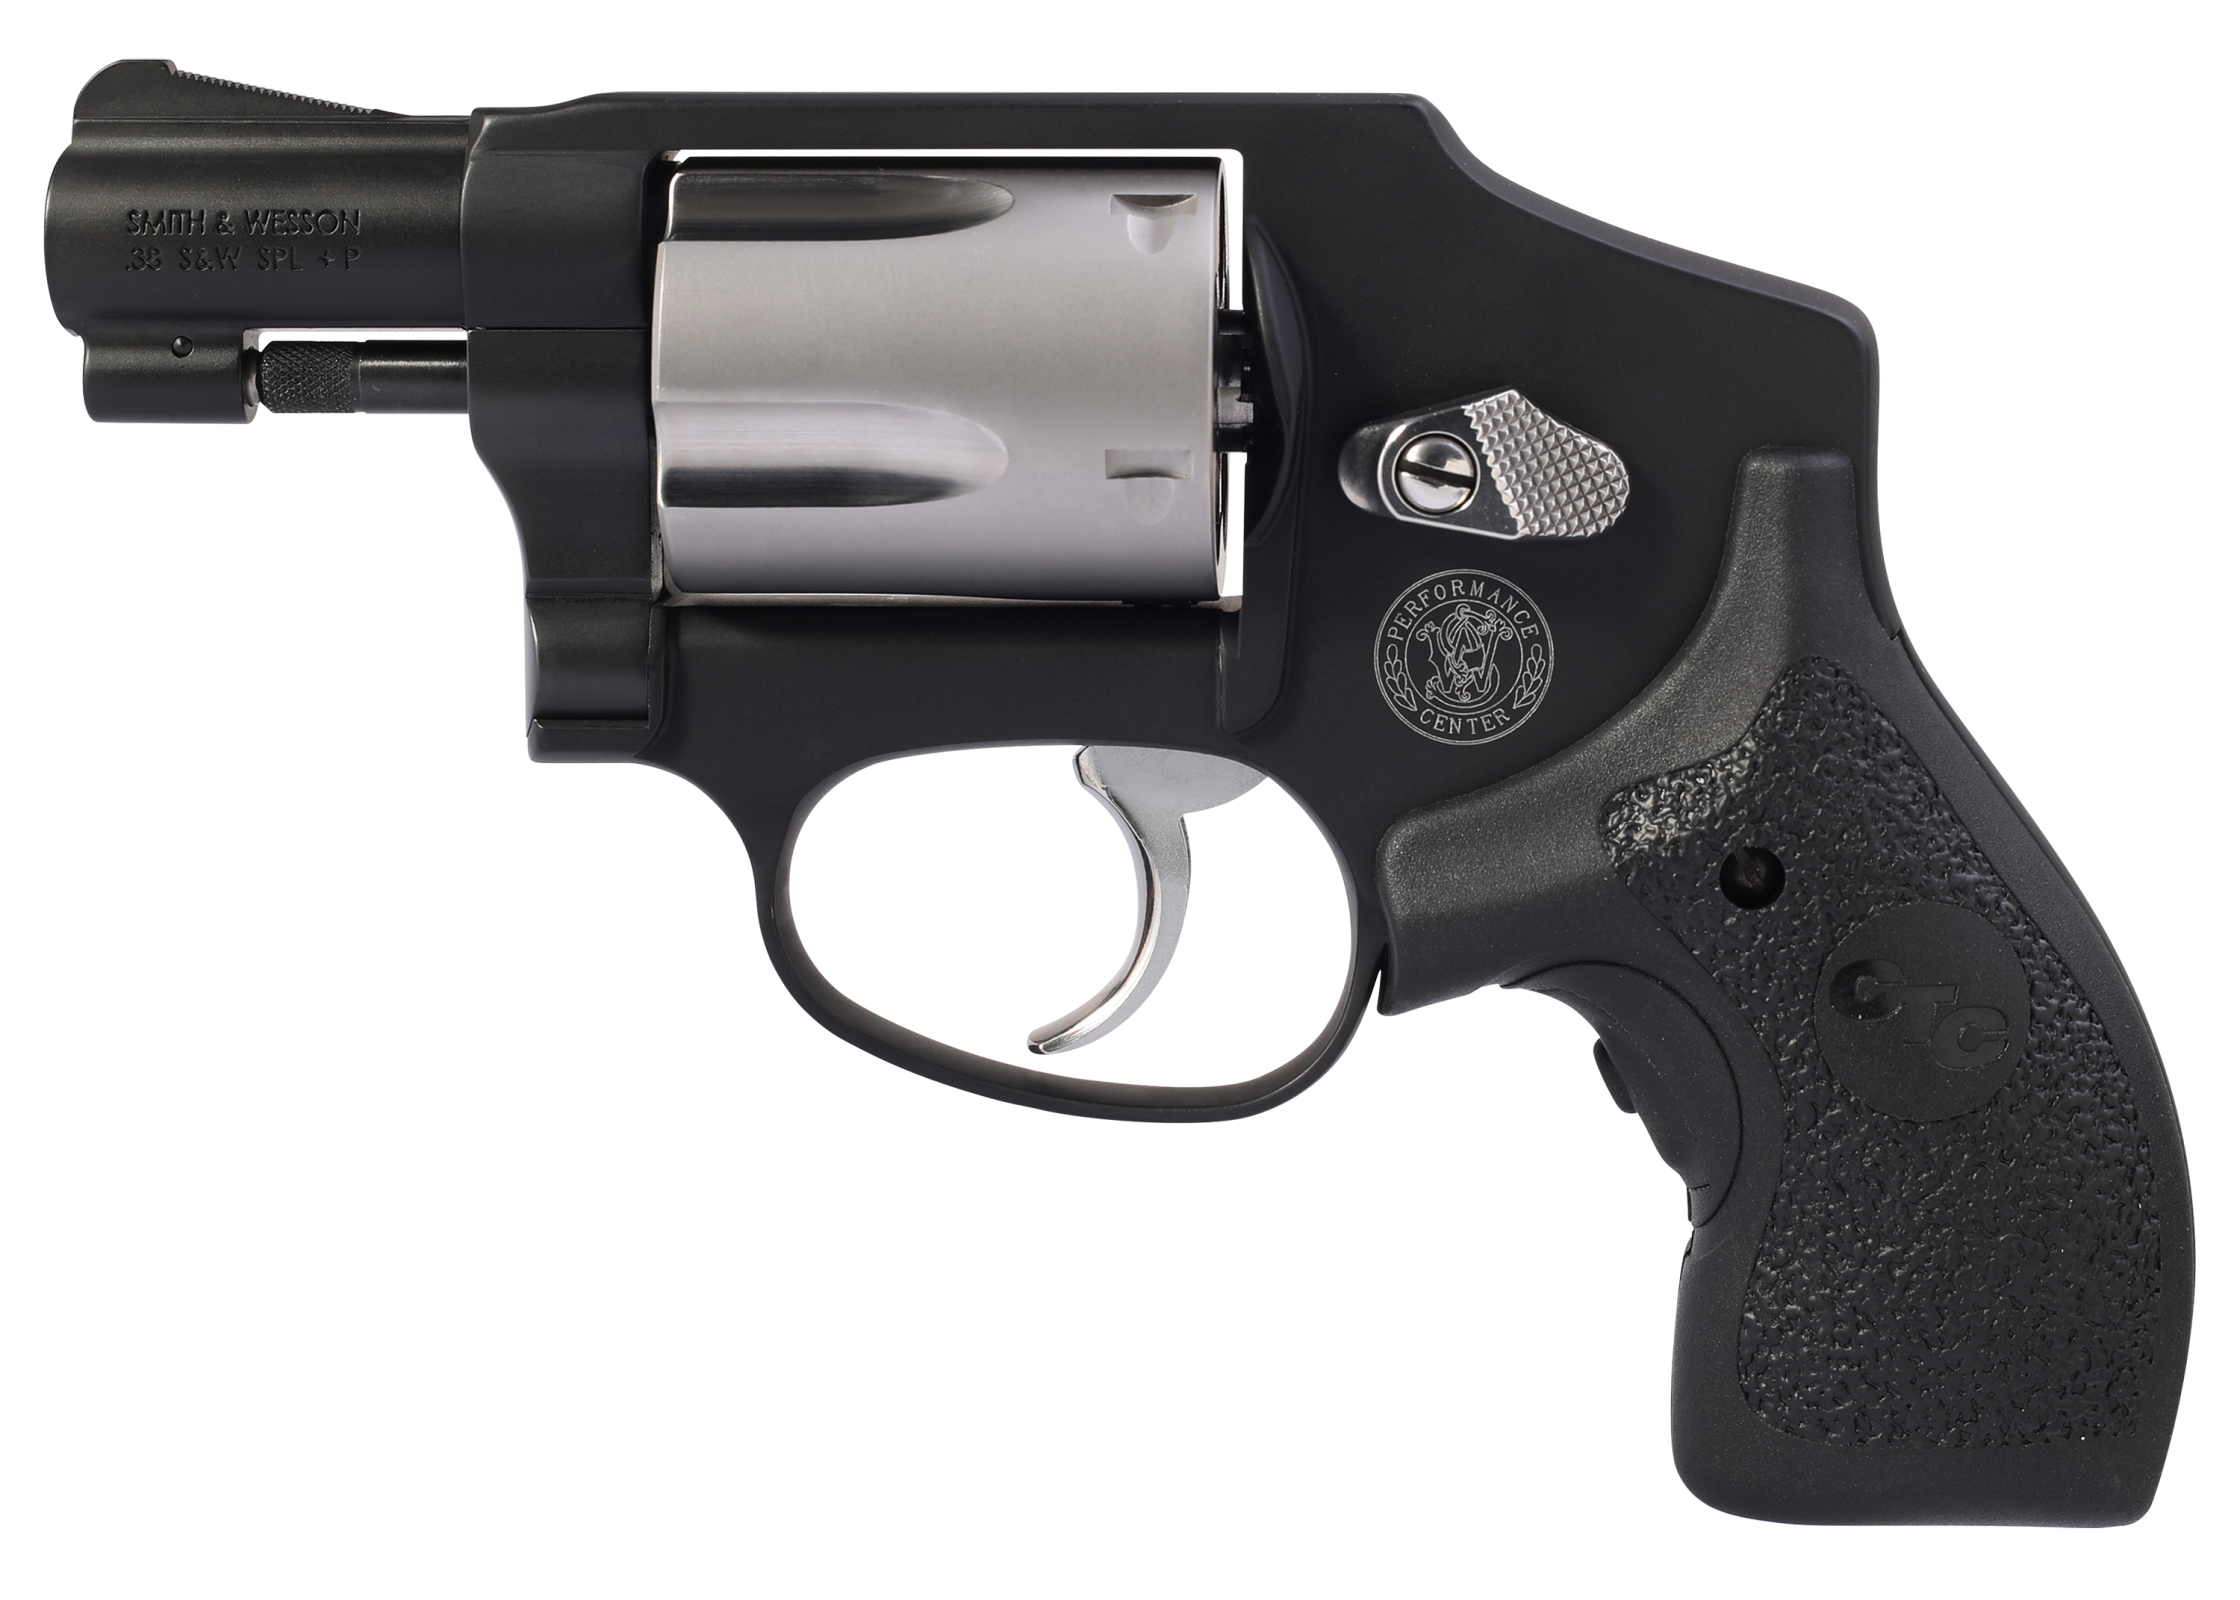 Smith & Wesson Model 442 Performance Center Revolver, 38 Special +P, with Crimson Trace LG-105 Lasergrips (12643)